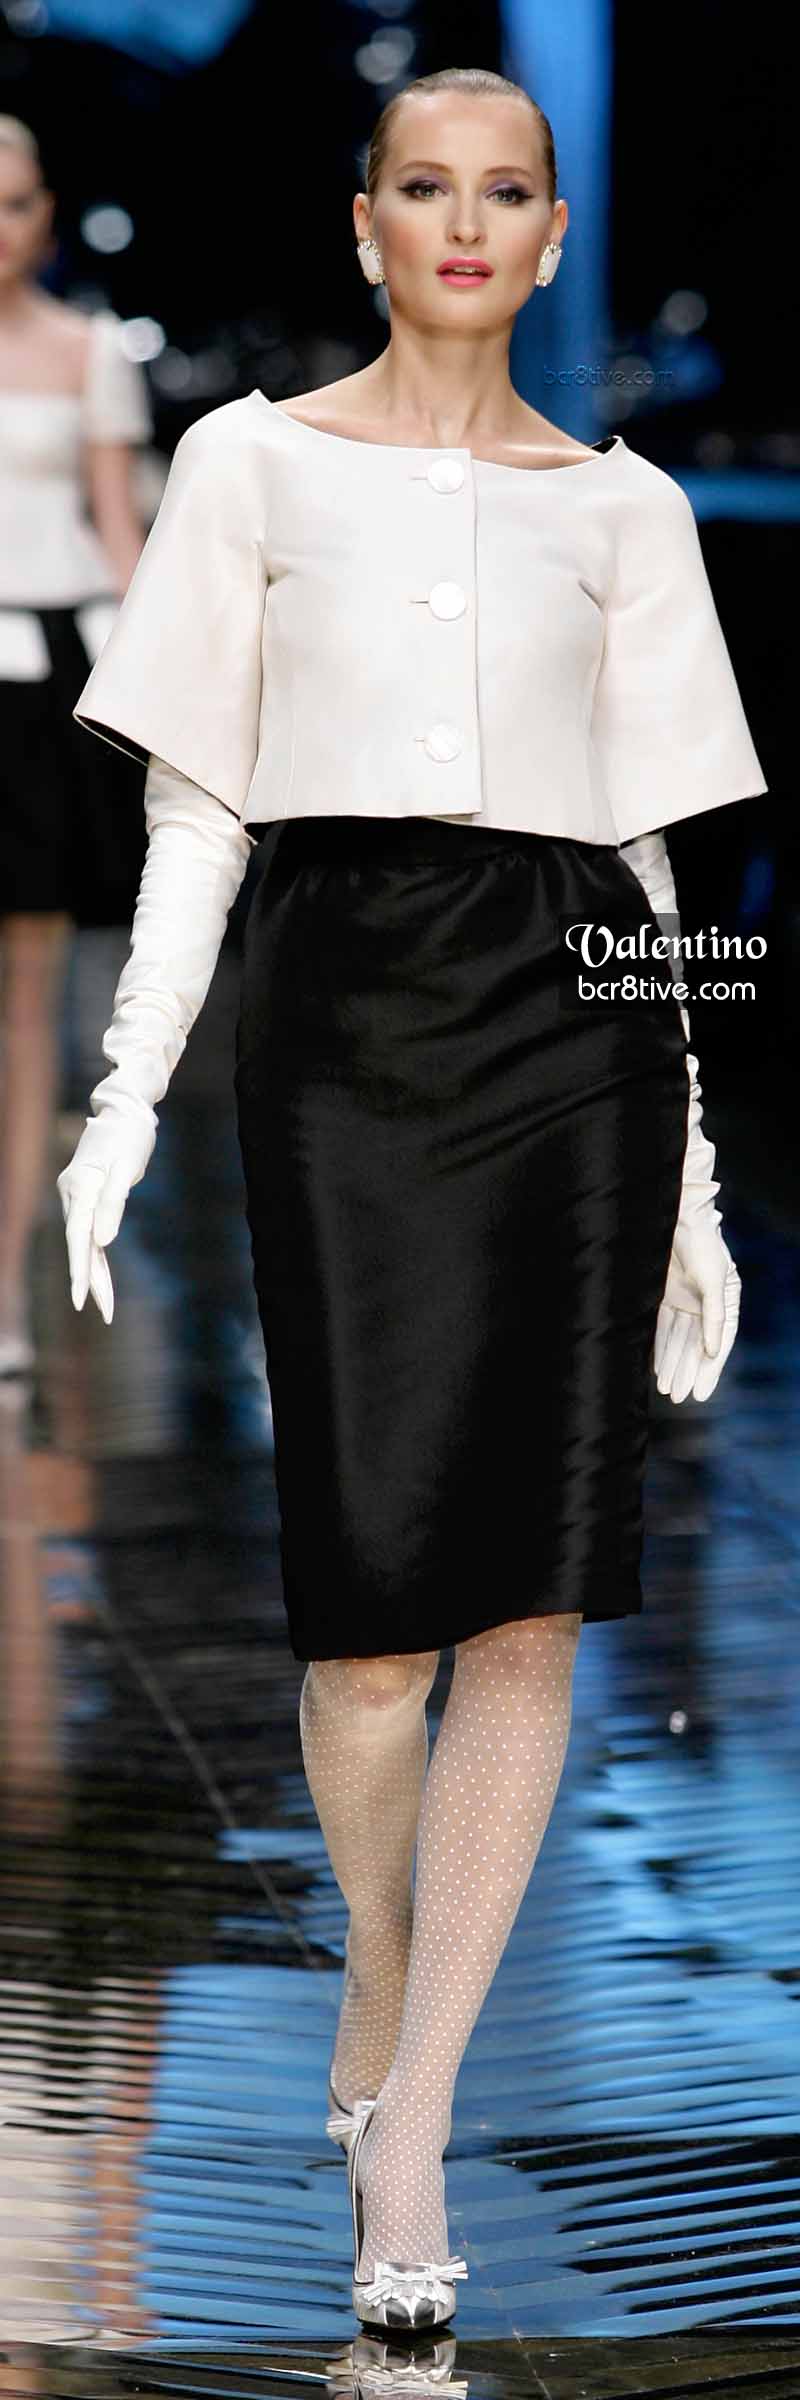 Poised Black and White Design by Valentino